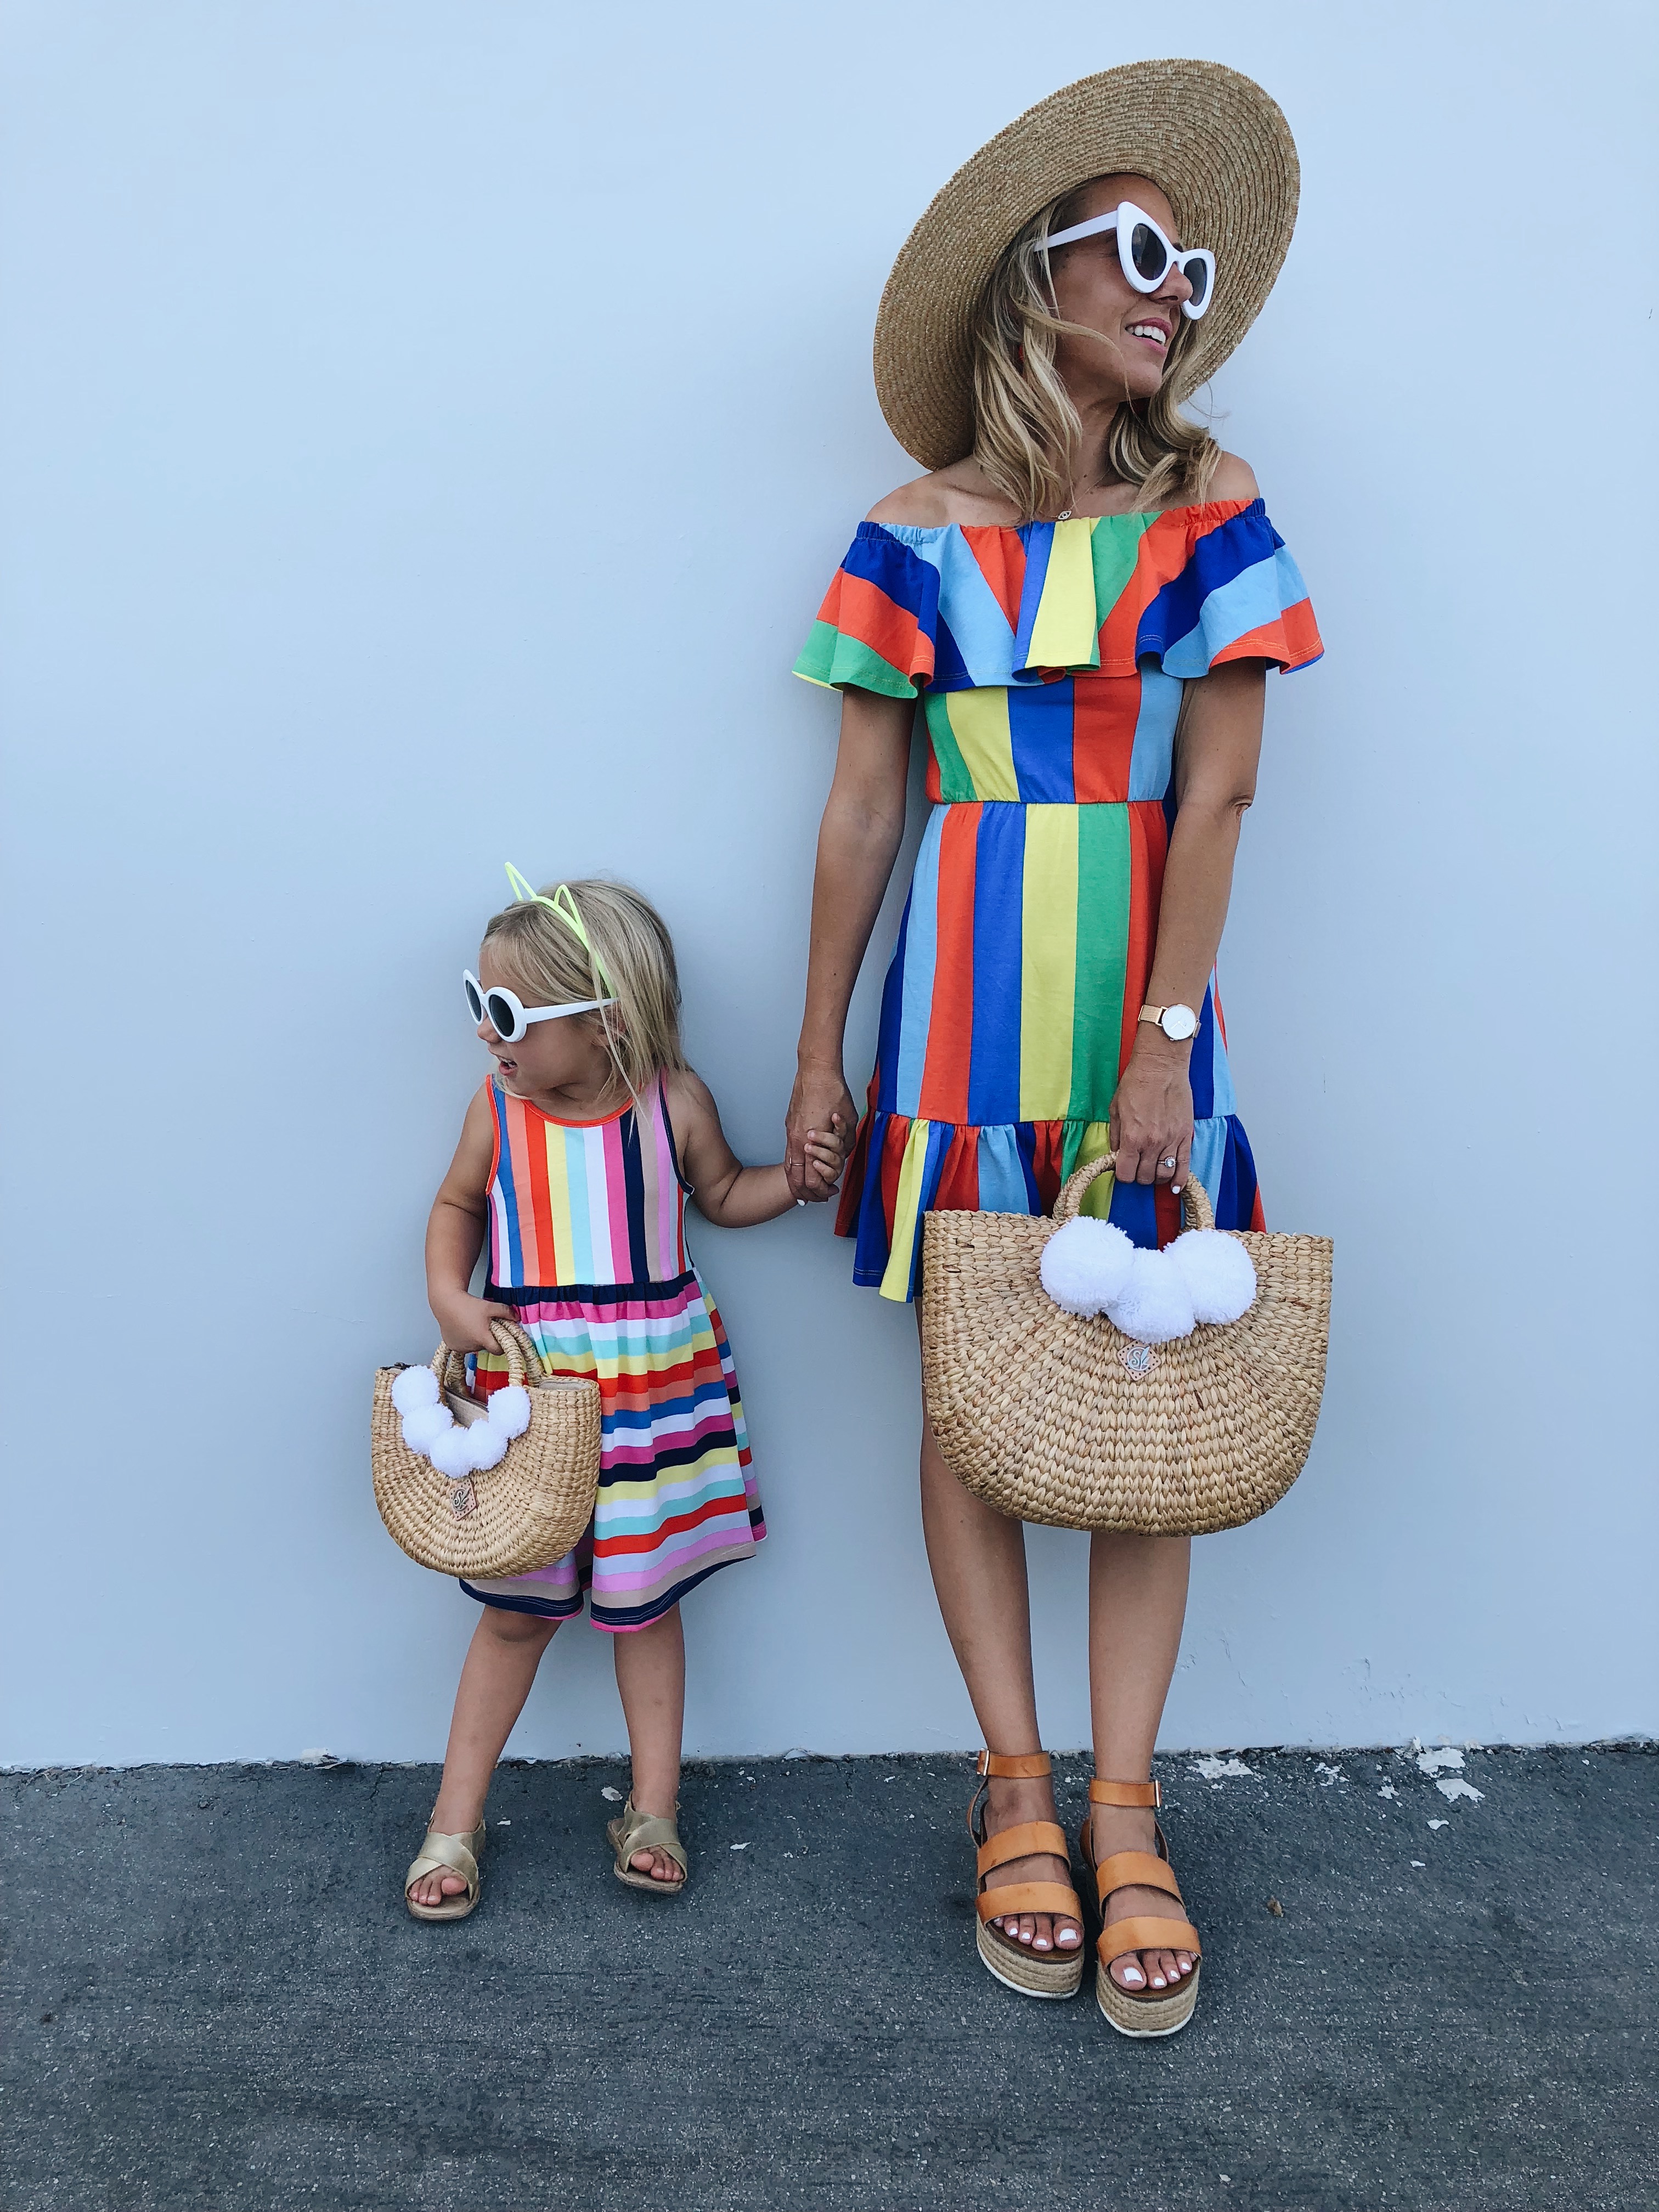 MOMMY & ME IN STRIPES- Jaclyn De Leon Style + MOM STYLE + MATCHING OUTFITS + COLORFUL STRIPES + SUMMER STYLE + KID STYLE + MOMMY LIFE + ASOS + H&M KIDS + CASUAL DRESSES + STREET STYLE + STRIPE TREND + #MOMLIFE #MOMMYANDME #MATCHING